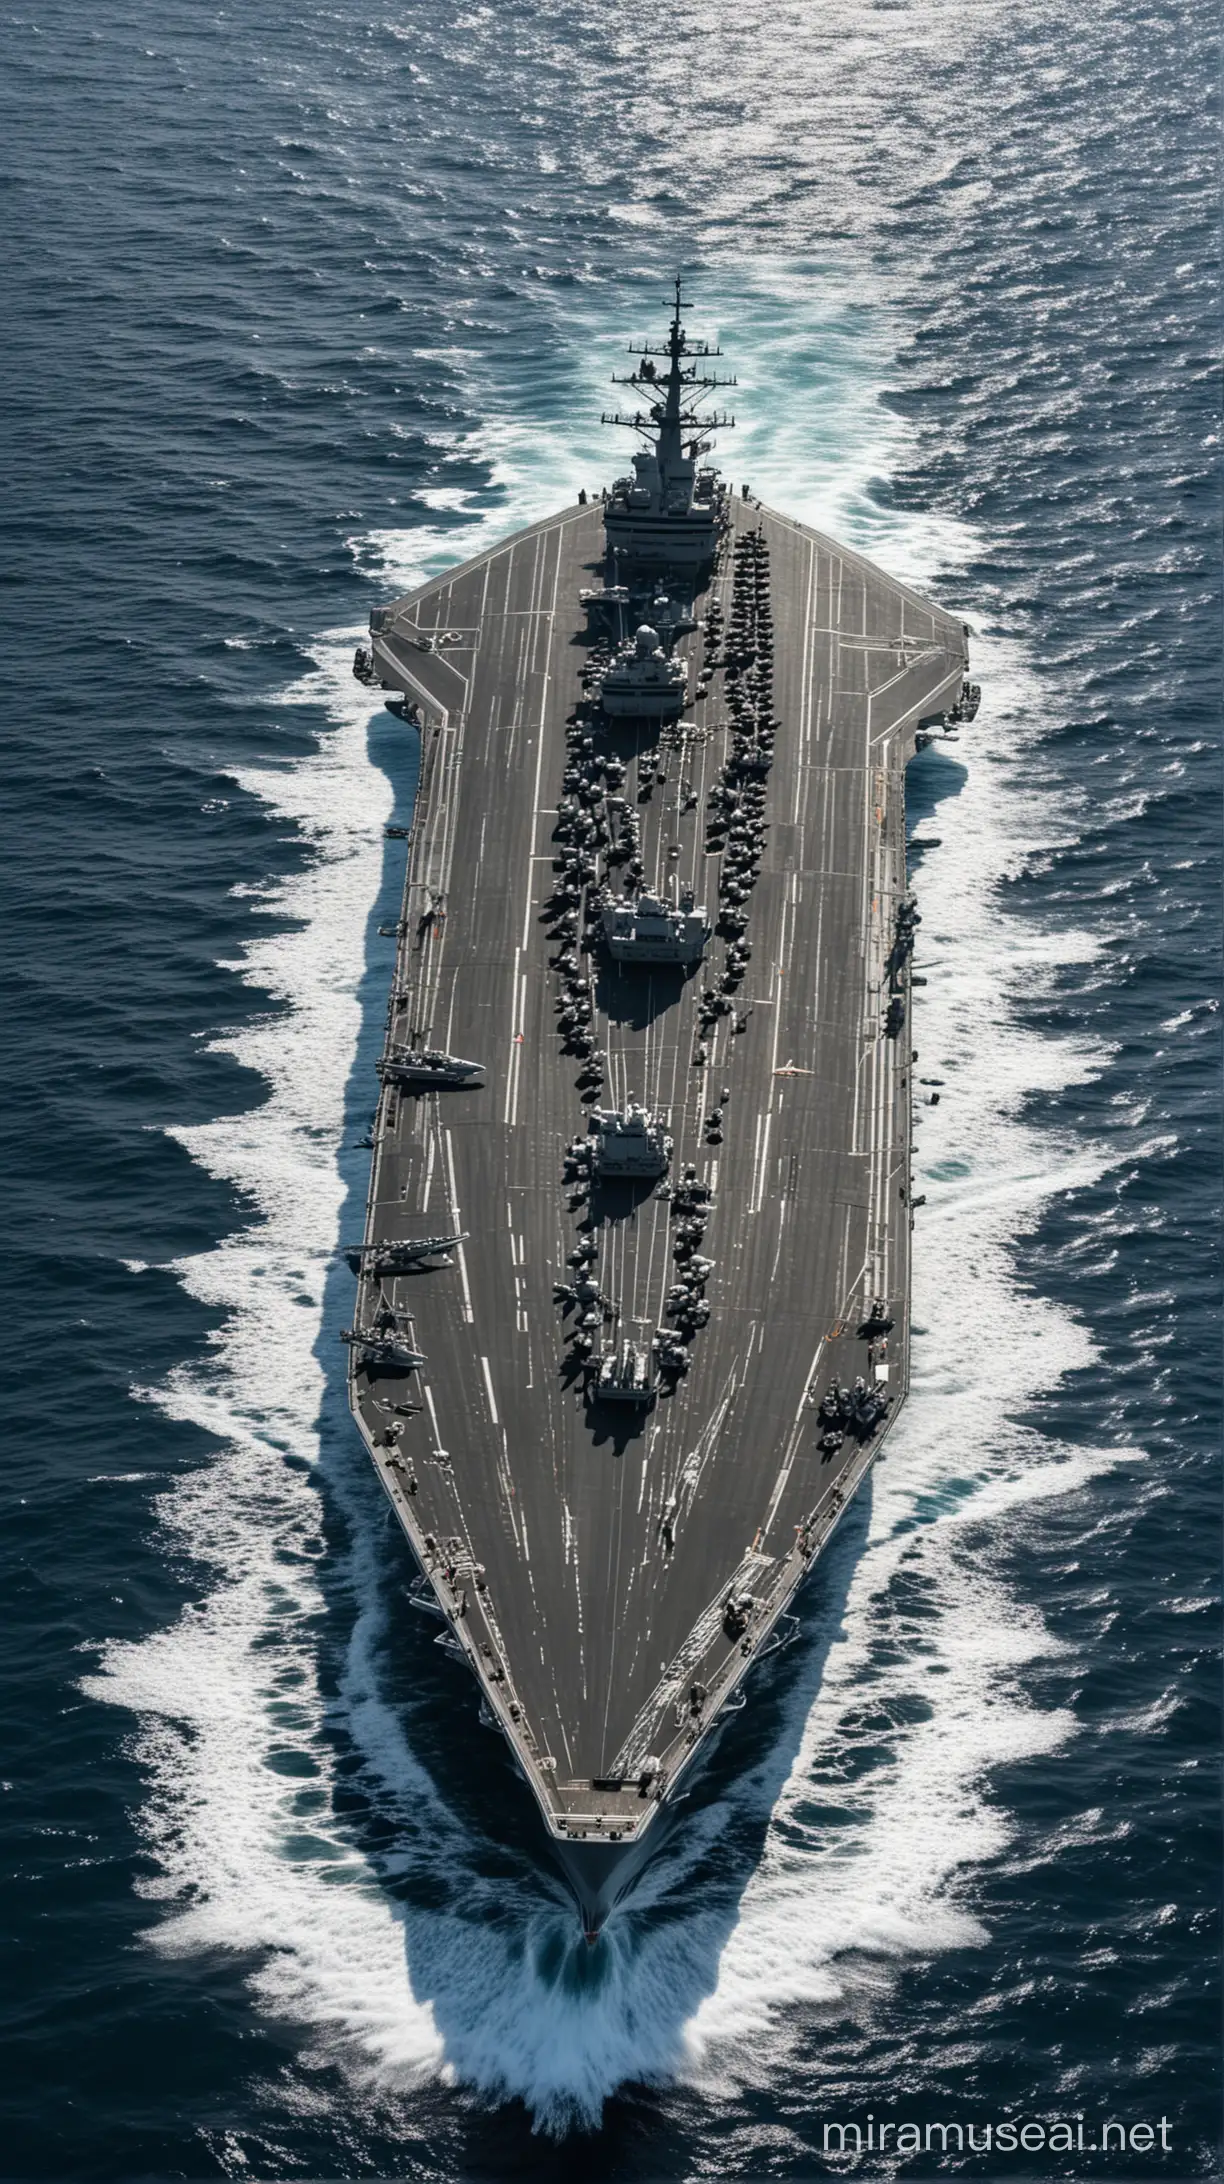 Majestic Aircraft Carrier Sailing in the Vast Ocean